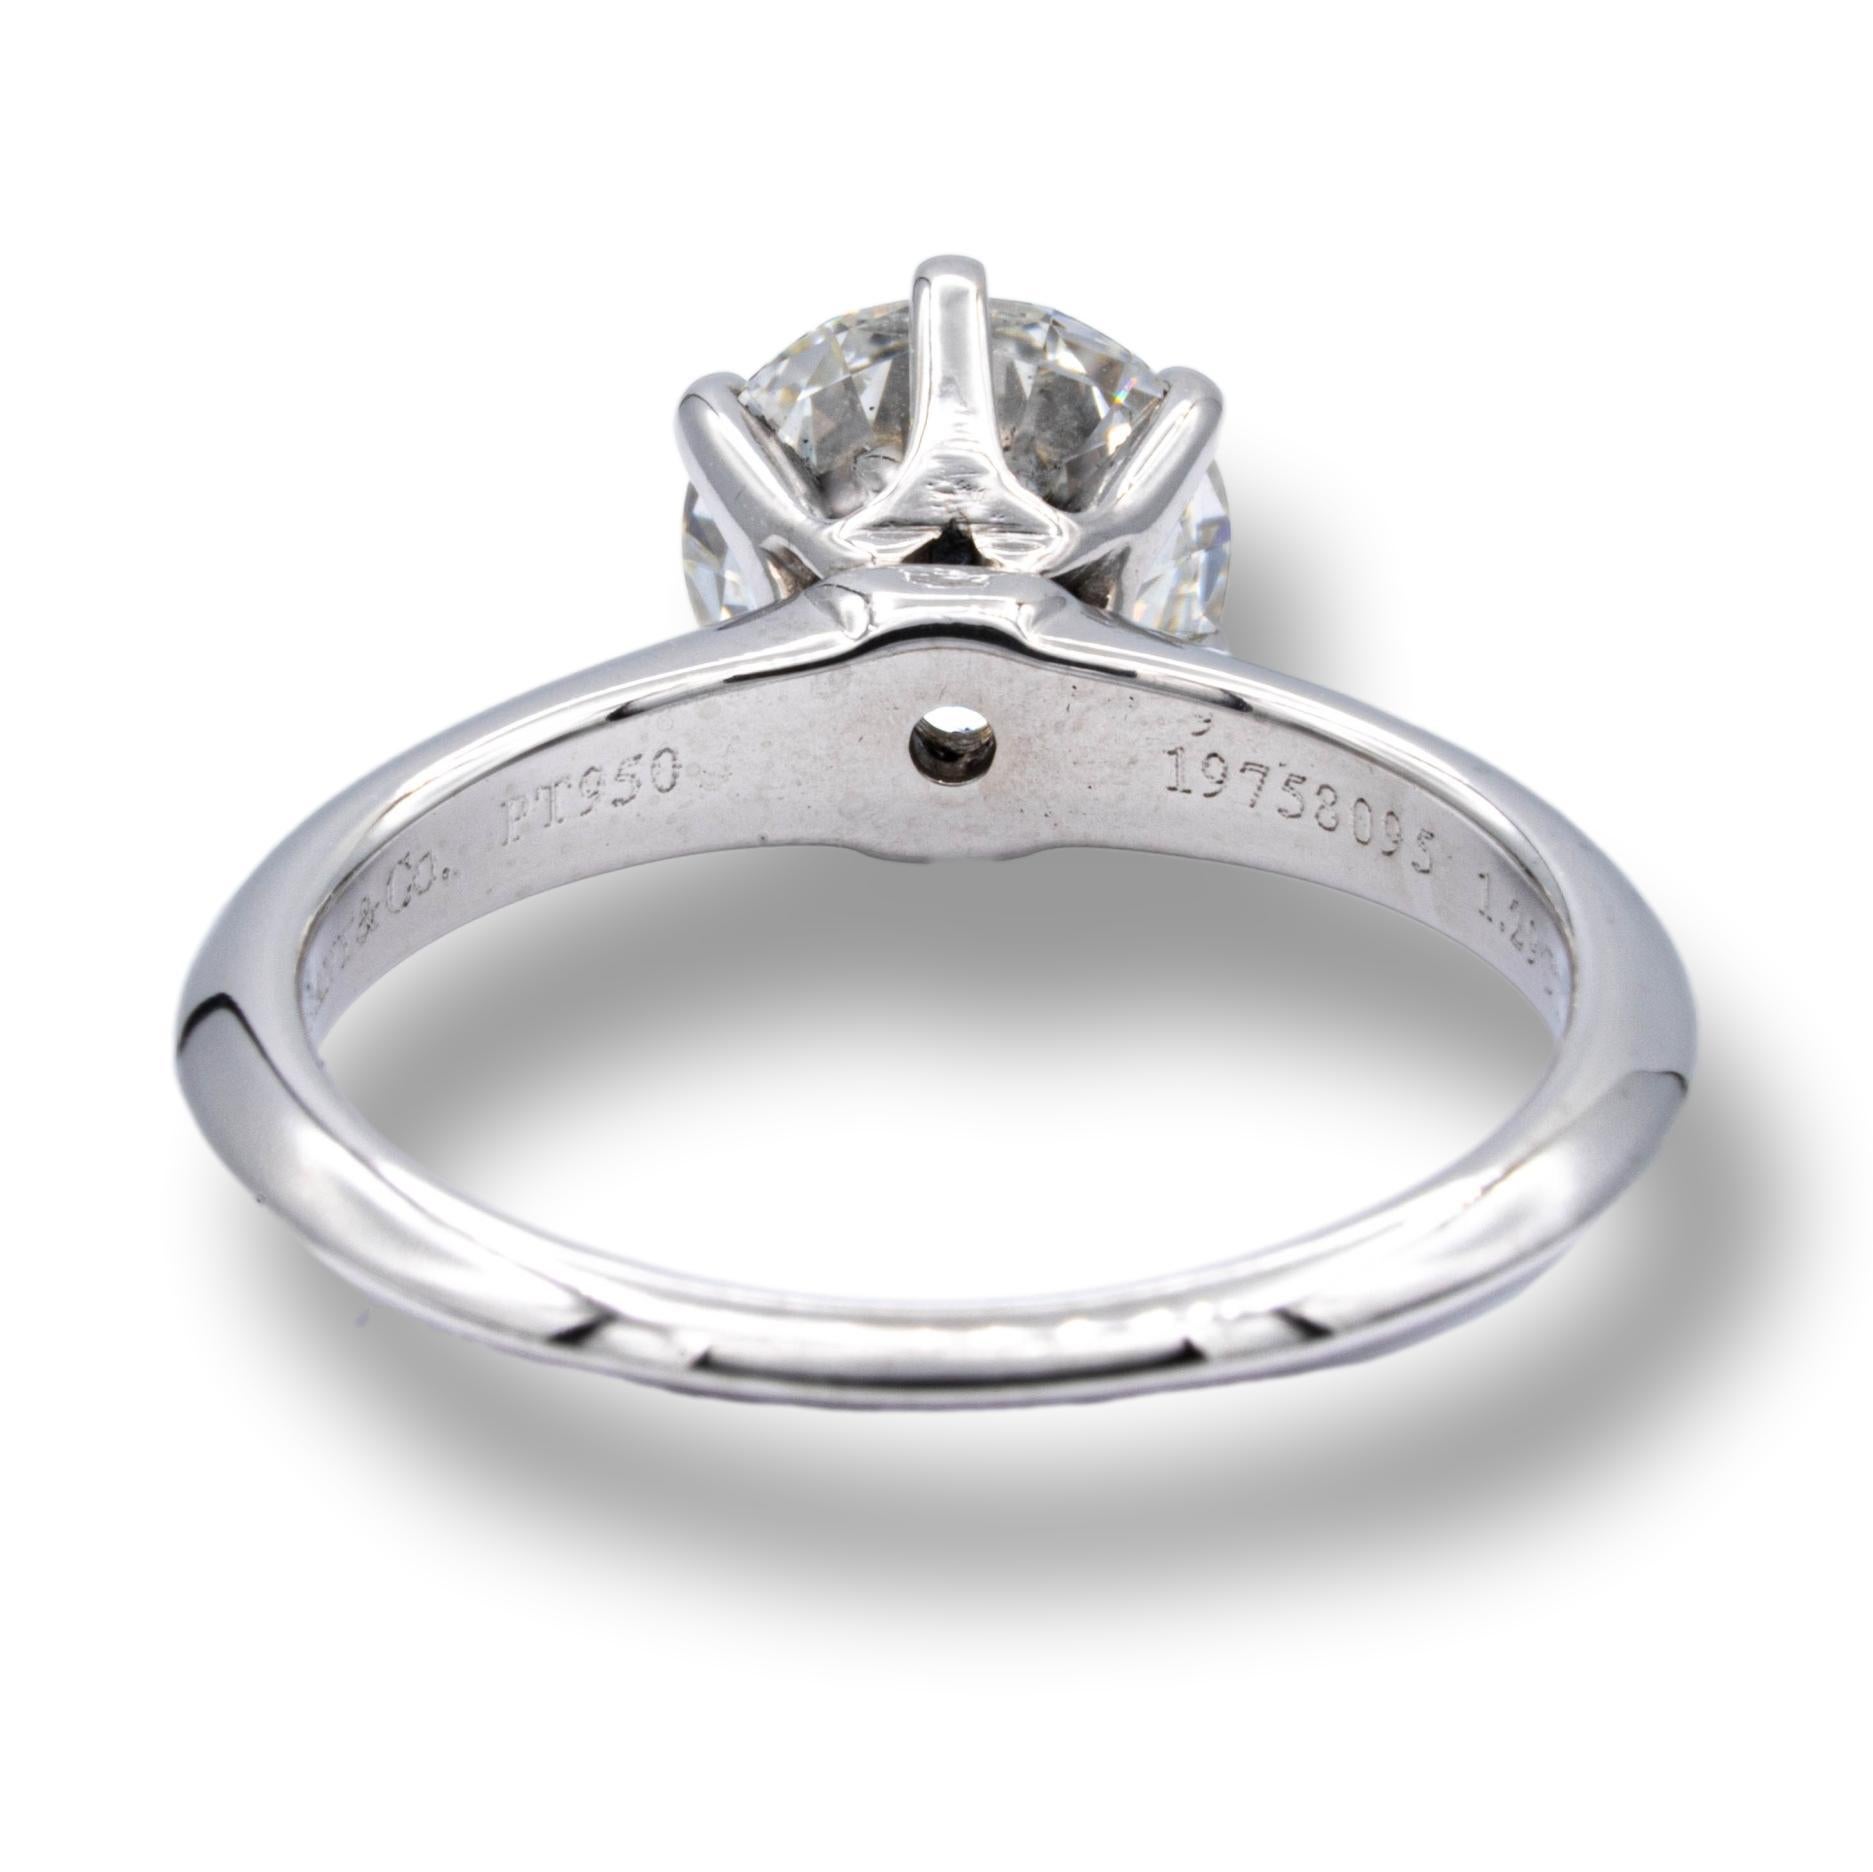 Tiffany & Co Round Brilliant Classic Solitaire Engagement Ring featuring a 1.29 ct Center H color, VS2 clarity, finely crafted in a 6 prong Platinum Mounting. This ring includes a Tiffany Certificate and a GIA (Gemological Institute of America)